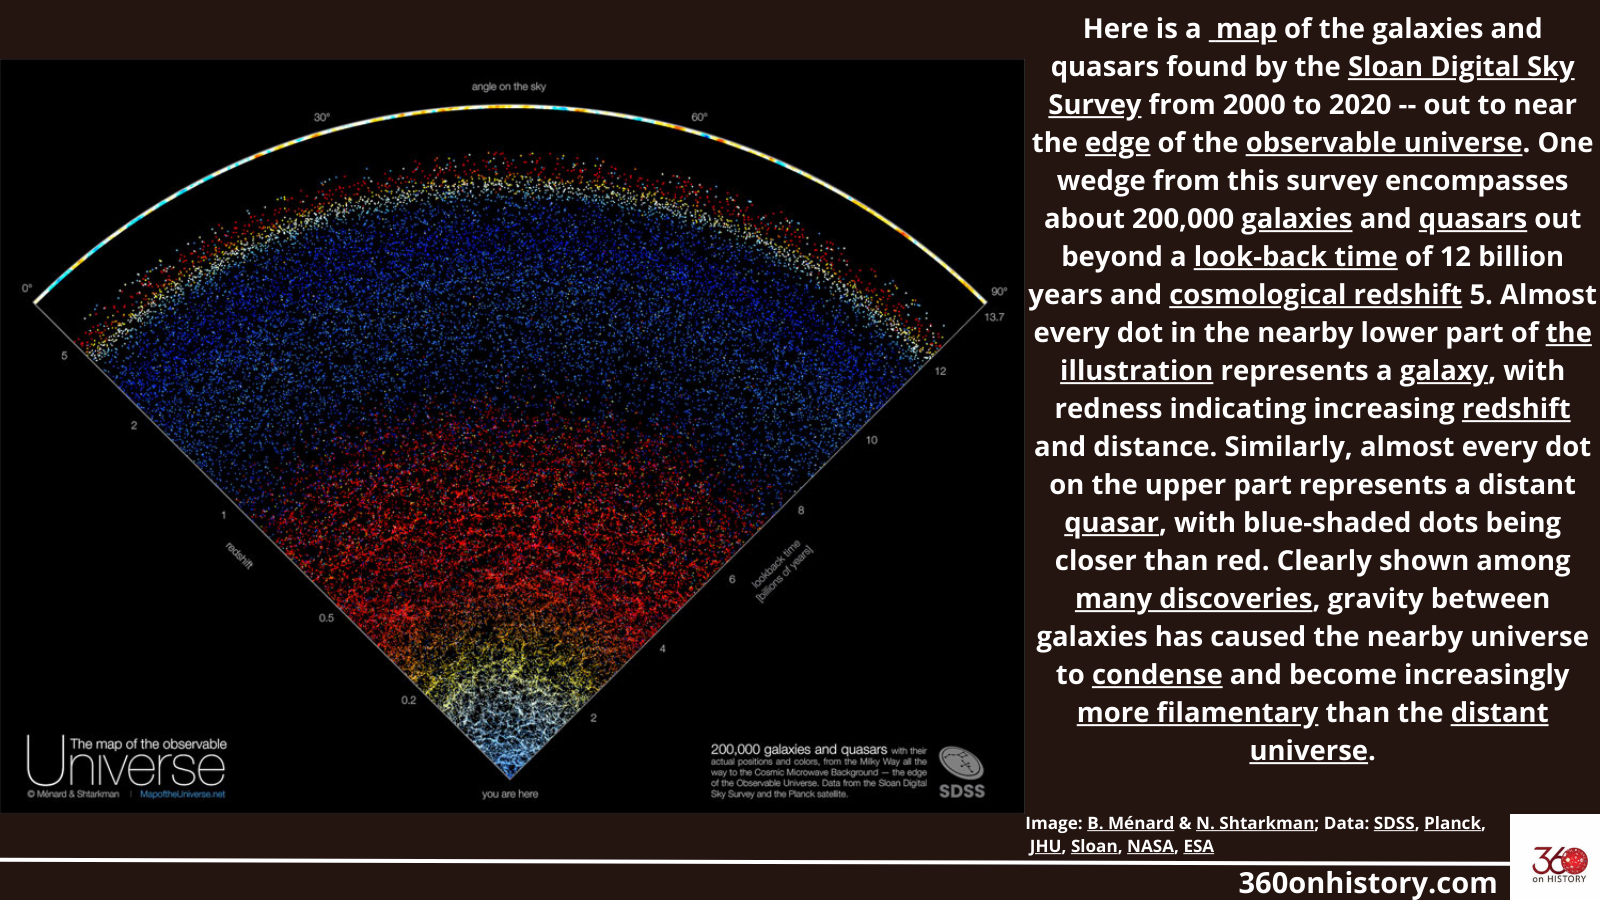 A Wedge of the observable universe by Sloan Digital Sky Survey